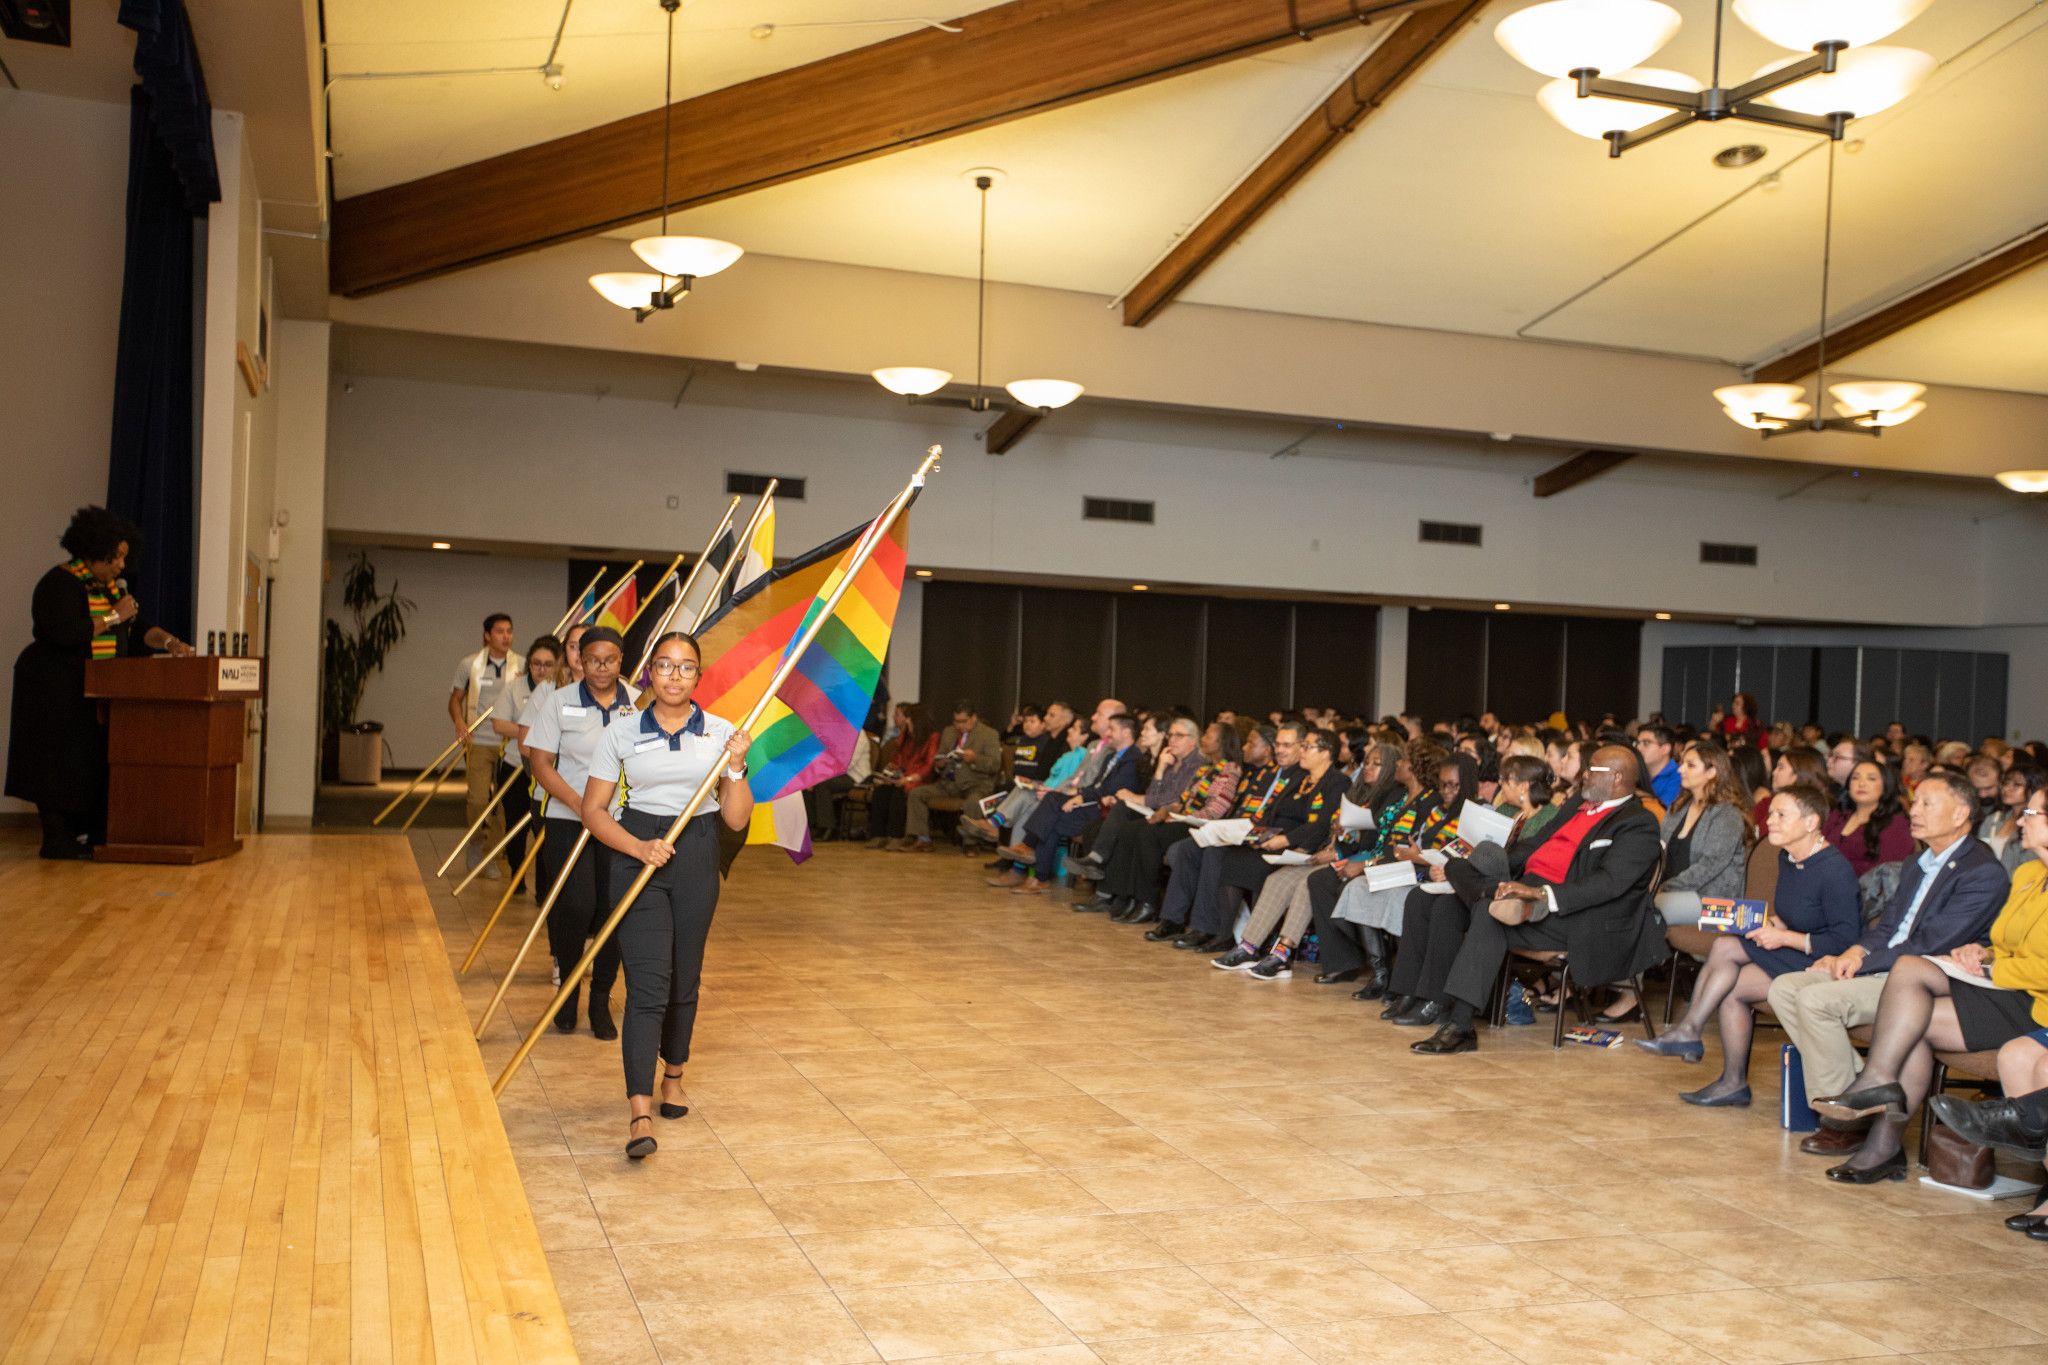 Lumberjacks of inclusion event hall featuring students holding pride flags.